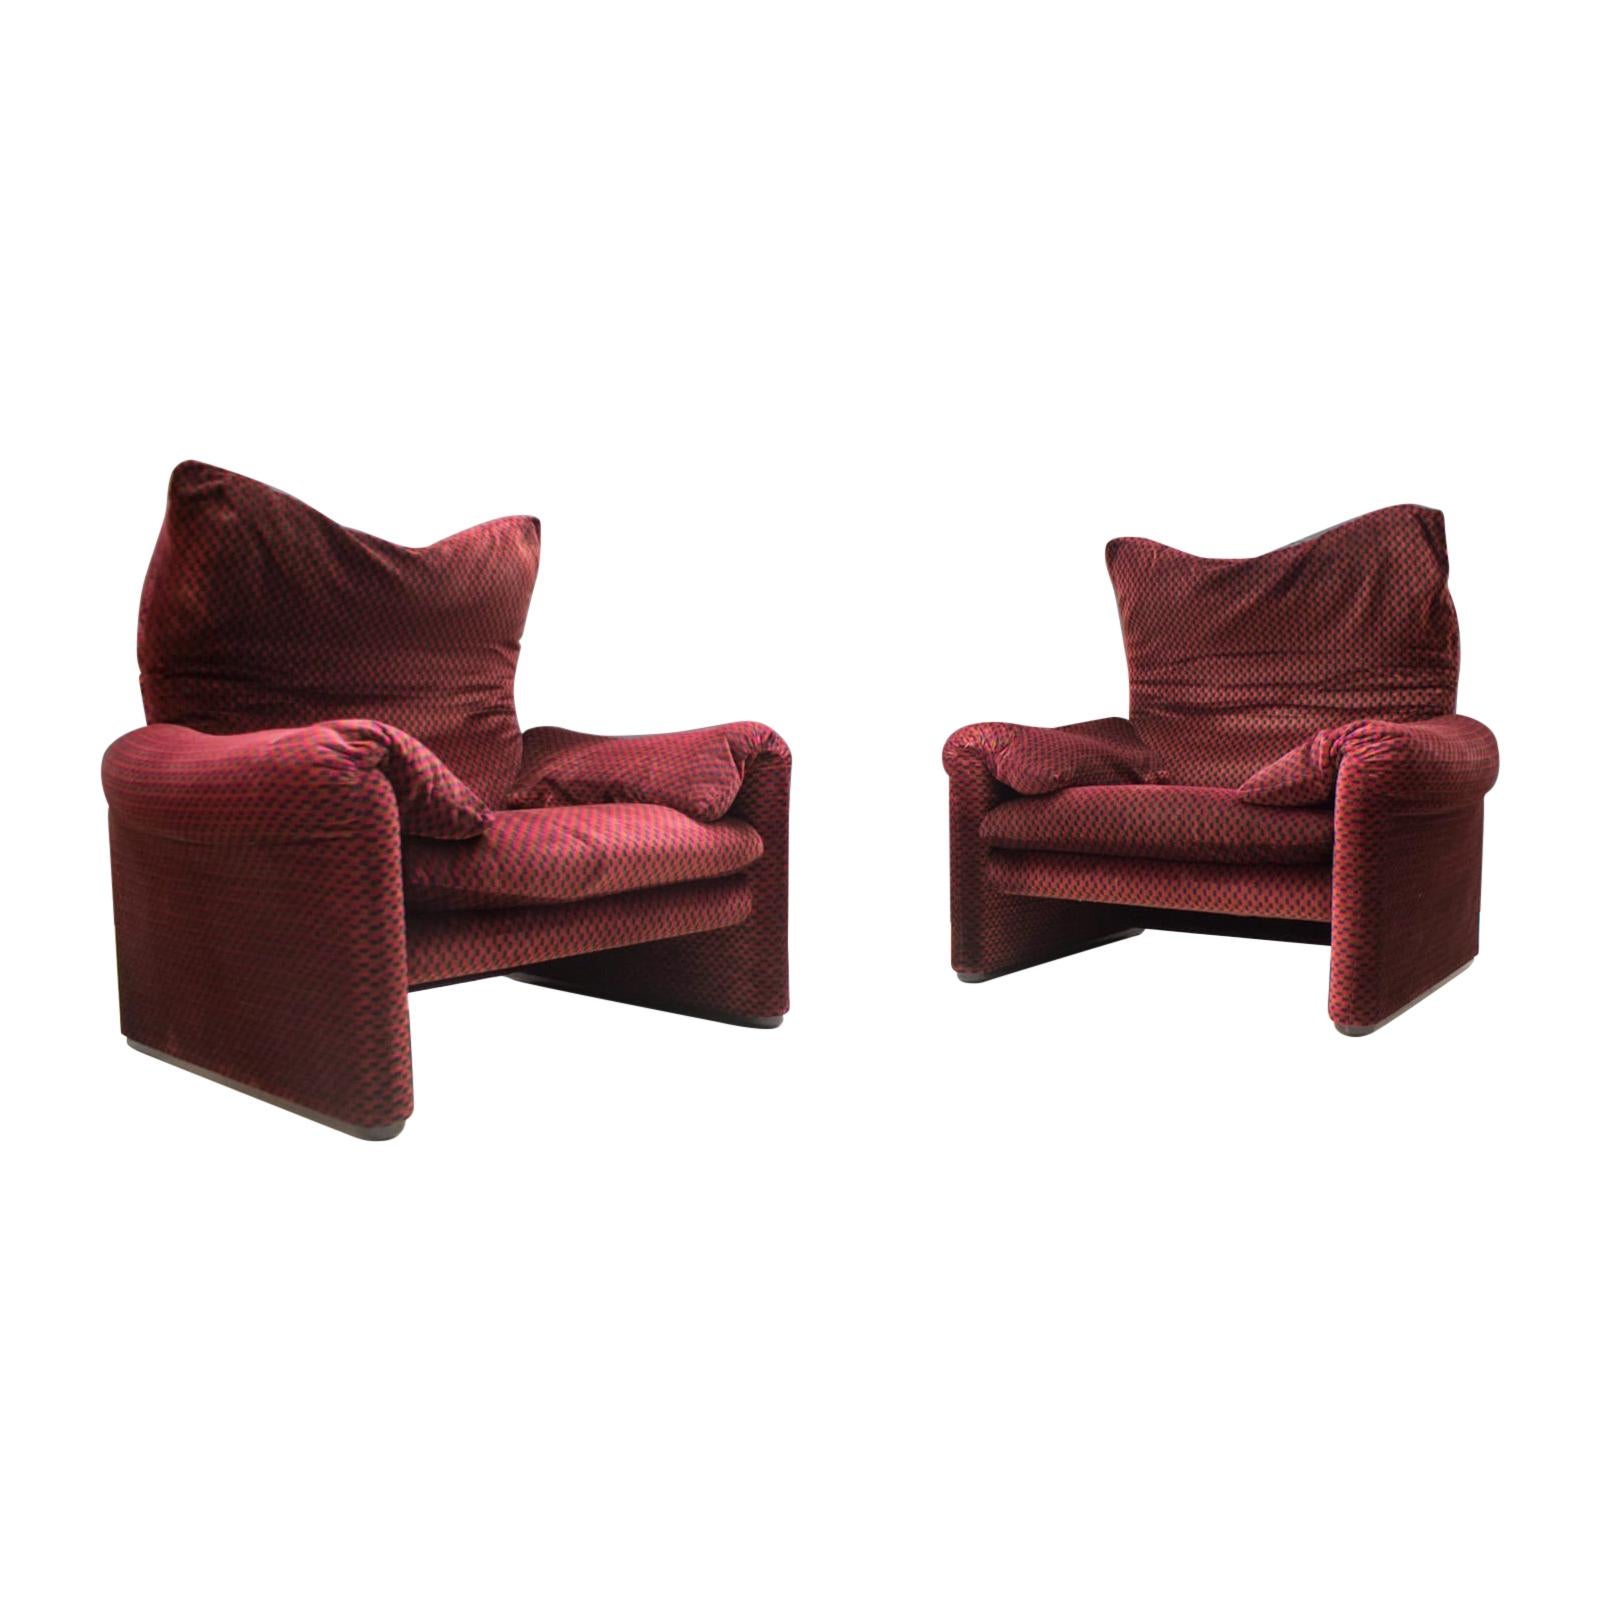 Set of 2 Maralunga Armchairs by Vico Magistretti for Cassina, 1970s